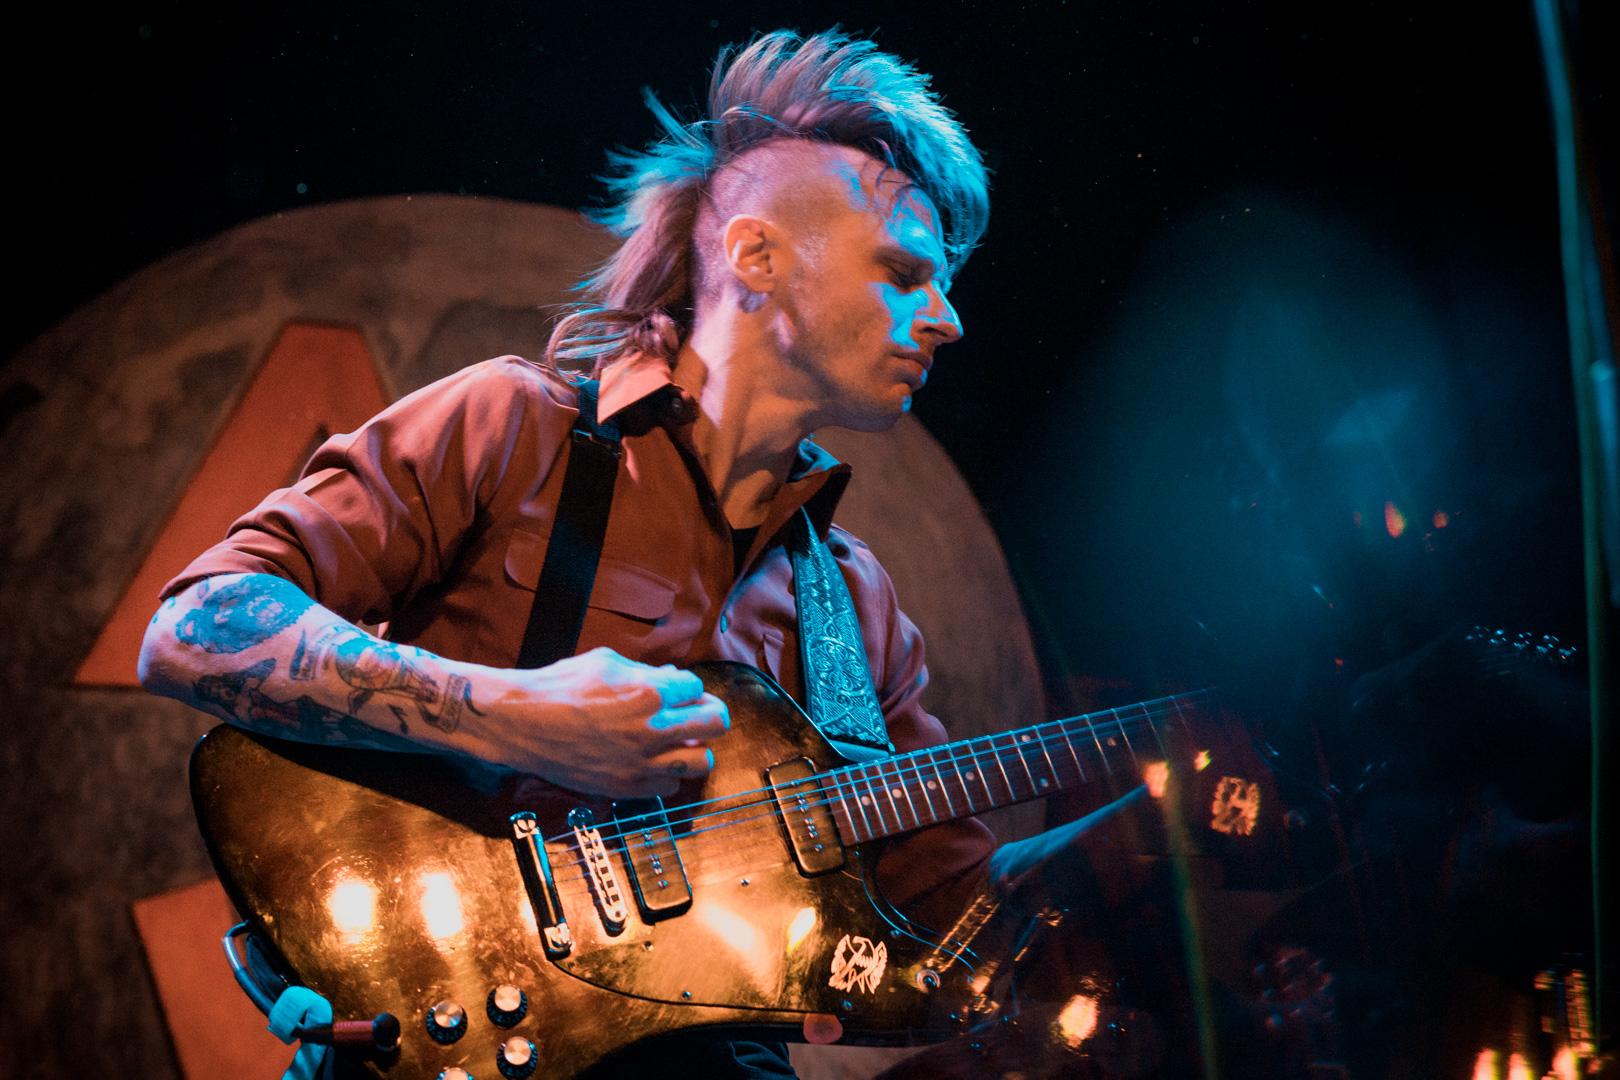 A man with guitar on stage with full mohawk